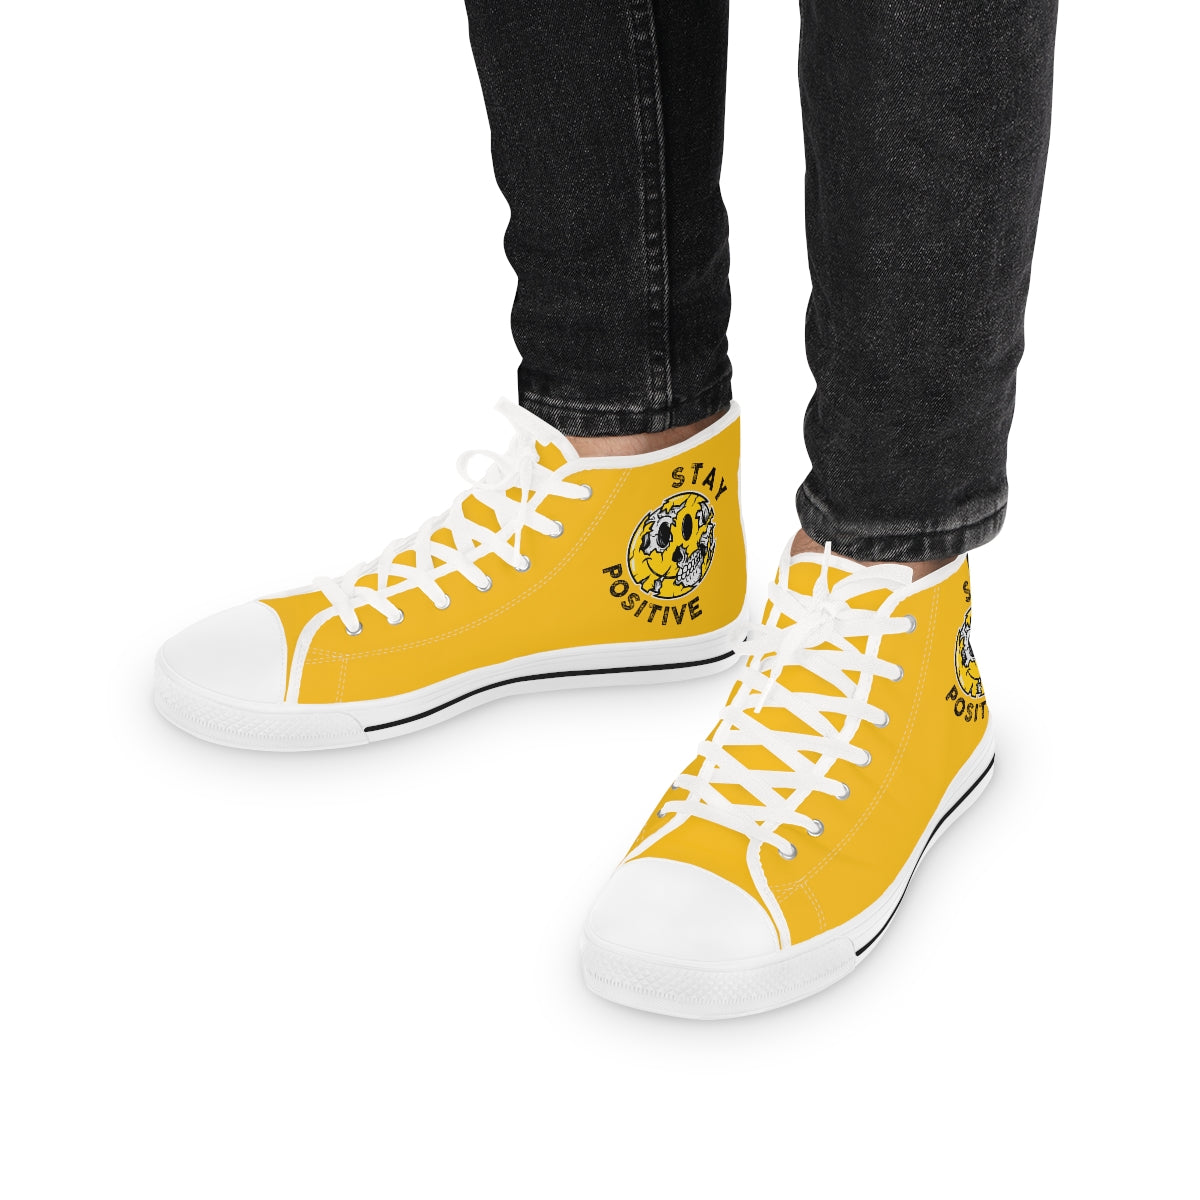 Stay Positive [Yellow] - Men's High Top Sneakers